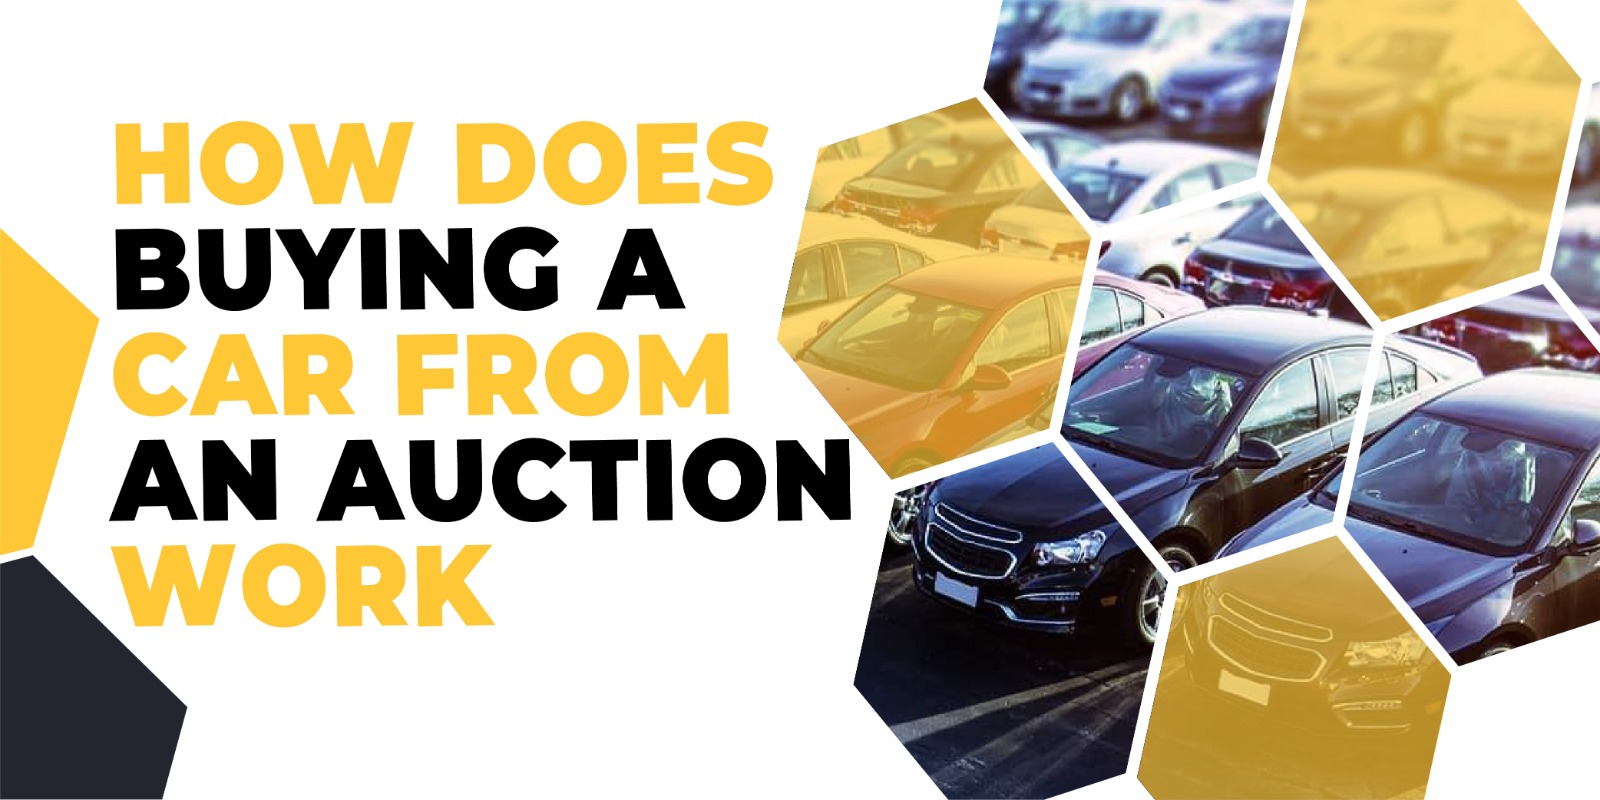 How Does Buying A Car From An Auction Work?